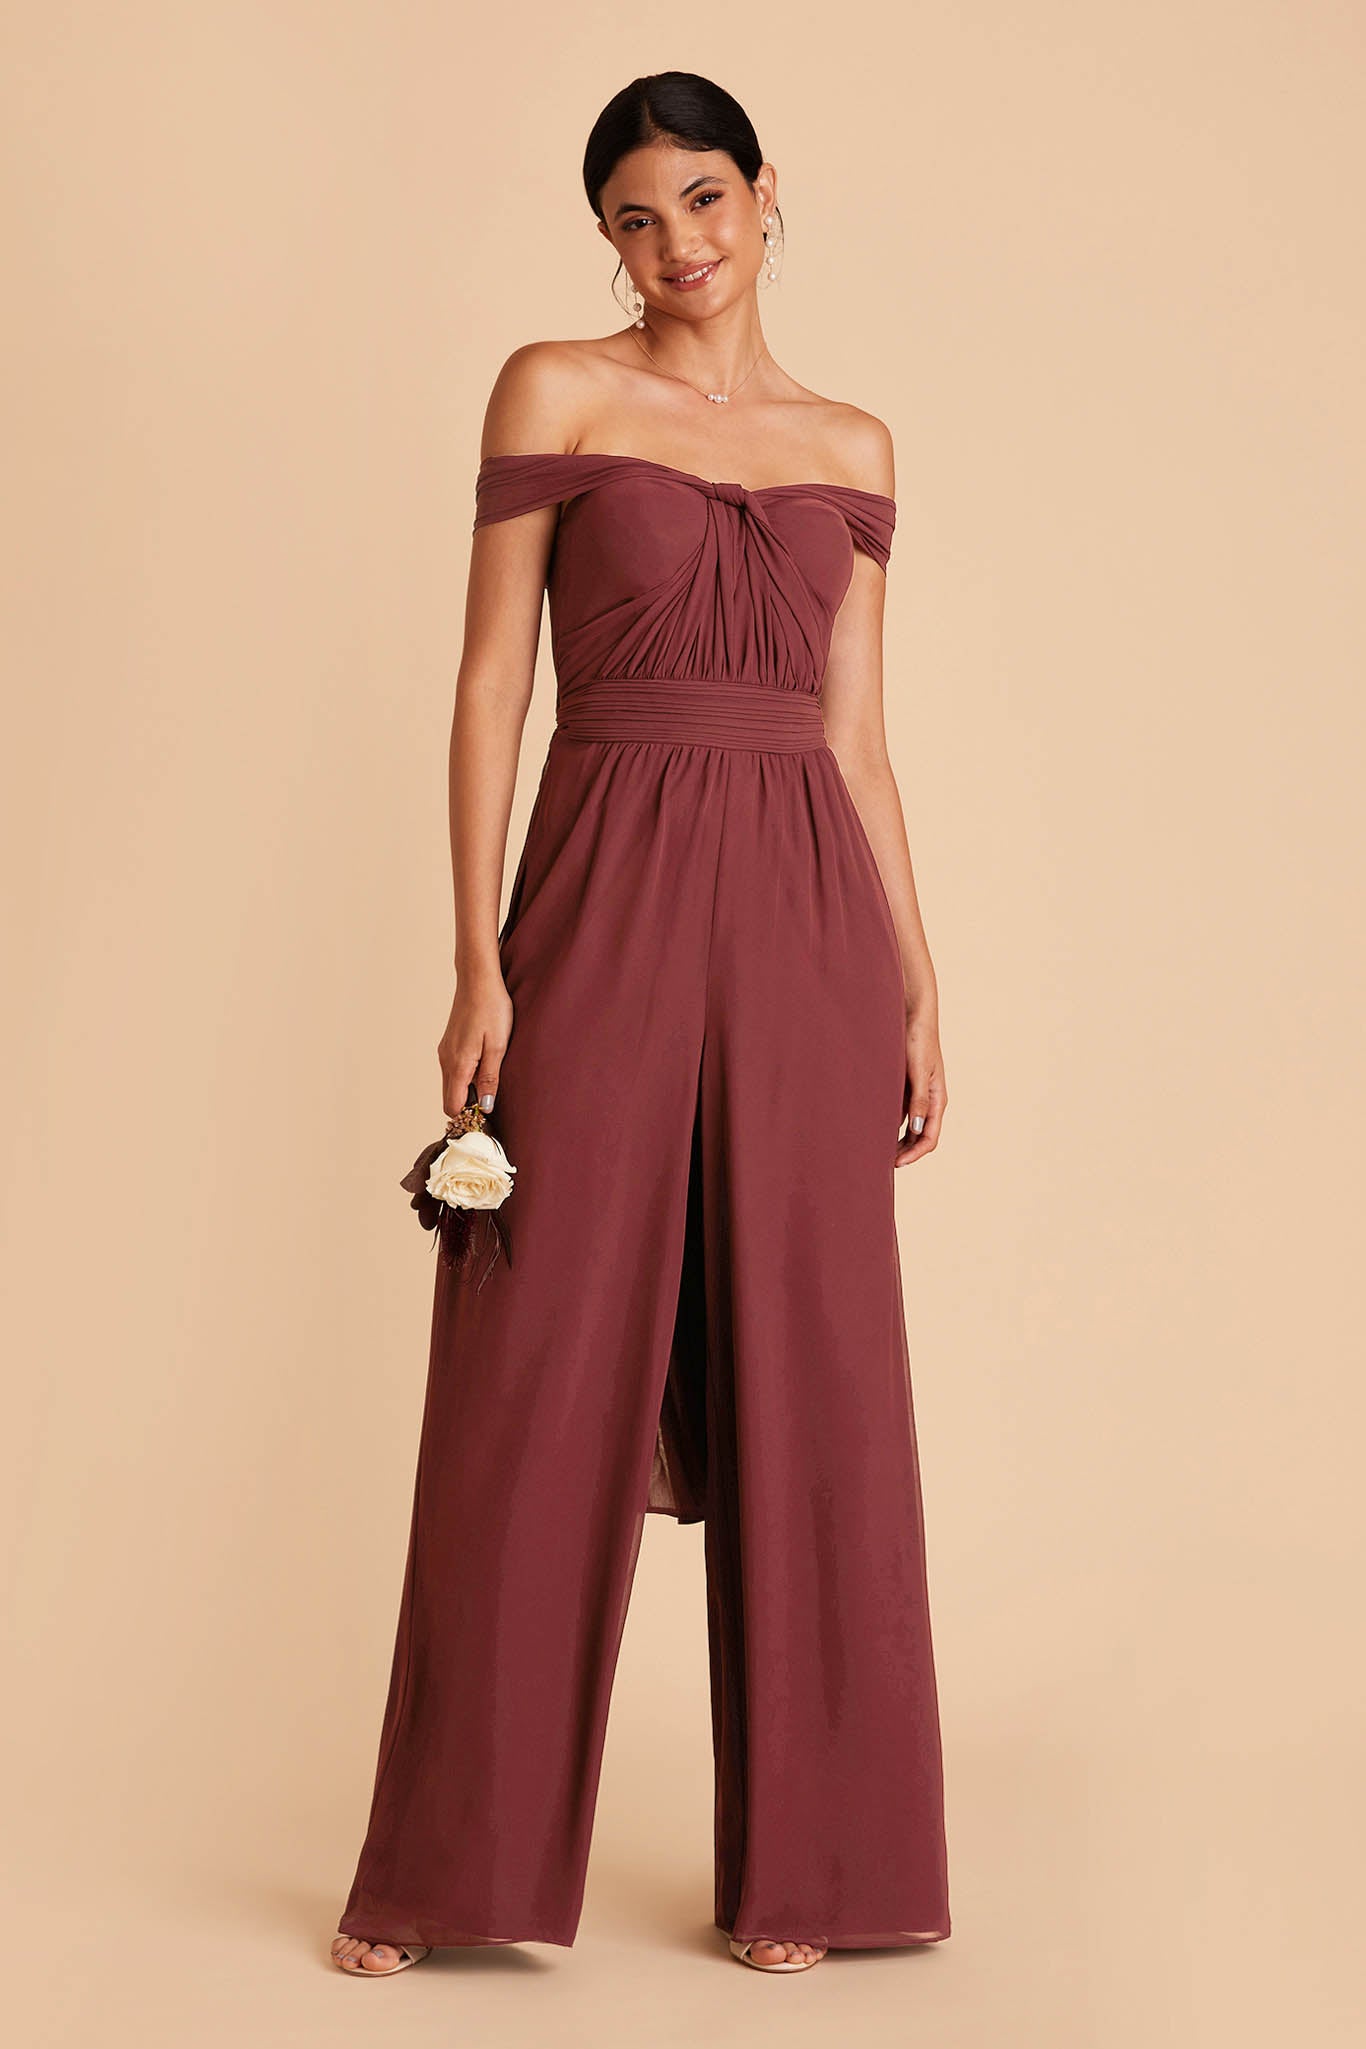 Red wedding jumpsuit with sweetheart bodice with convertible neckline